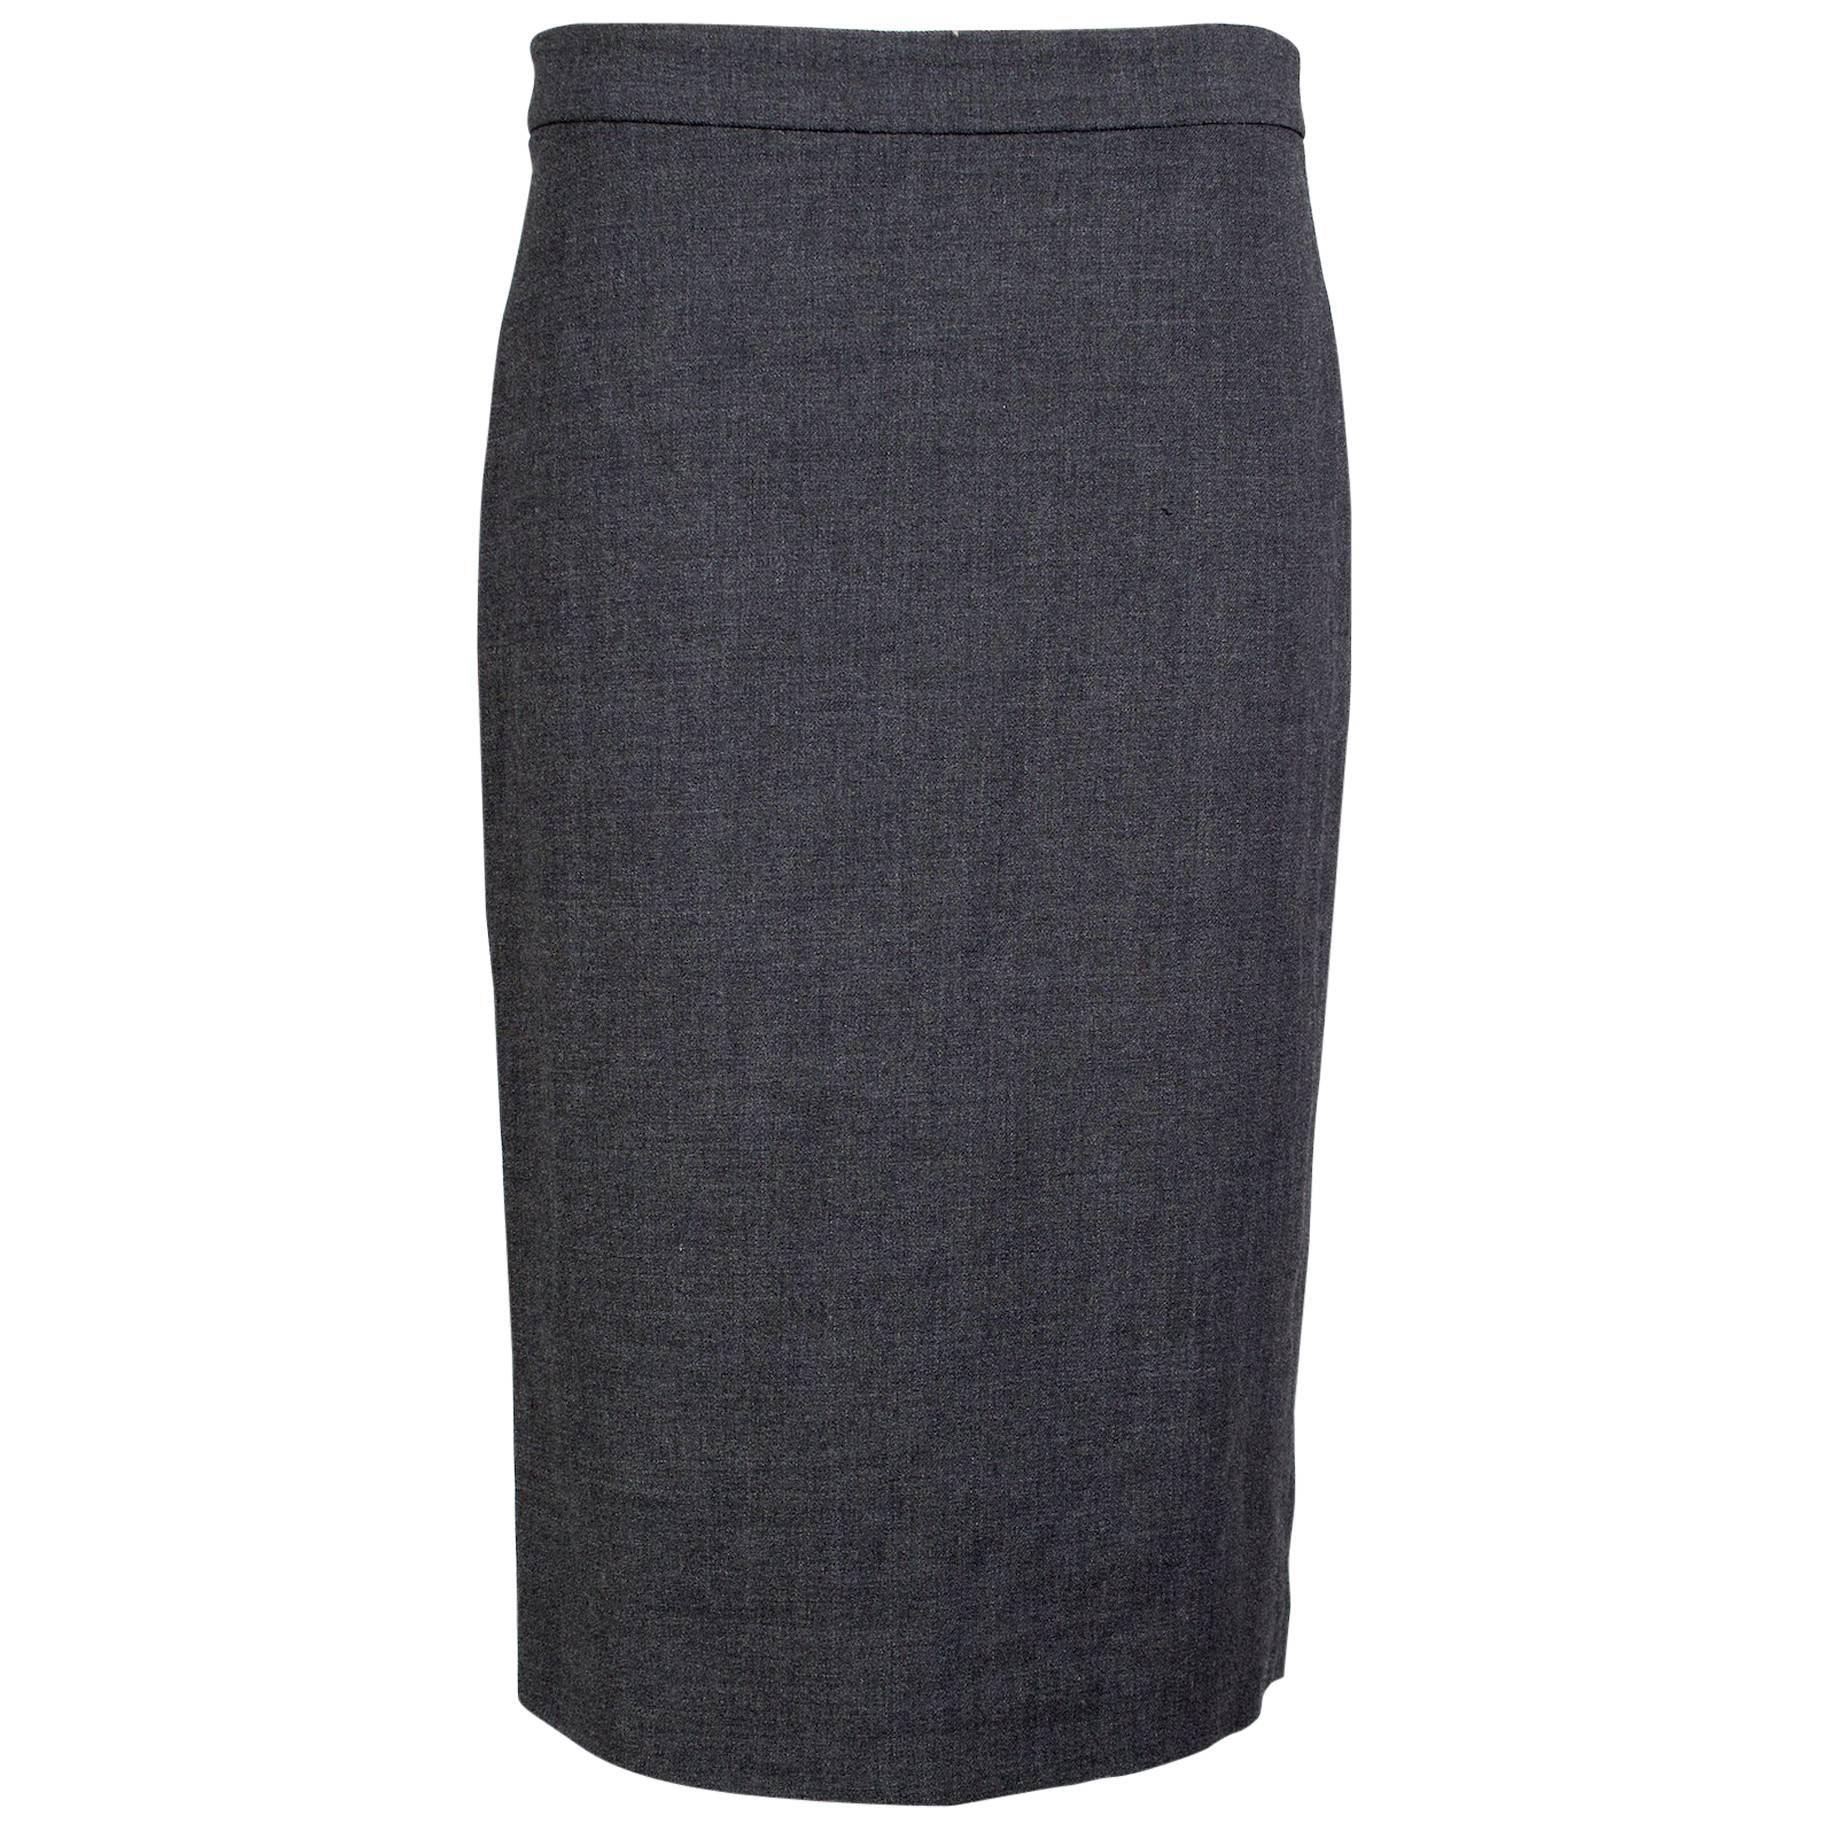 Jean Paul Gaultier Wool Pencil Skirt with Black Trim and Tassel circa 1990s